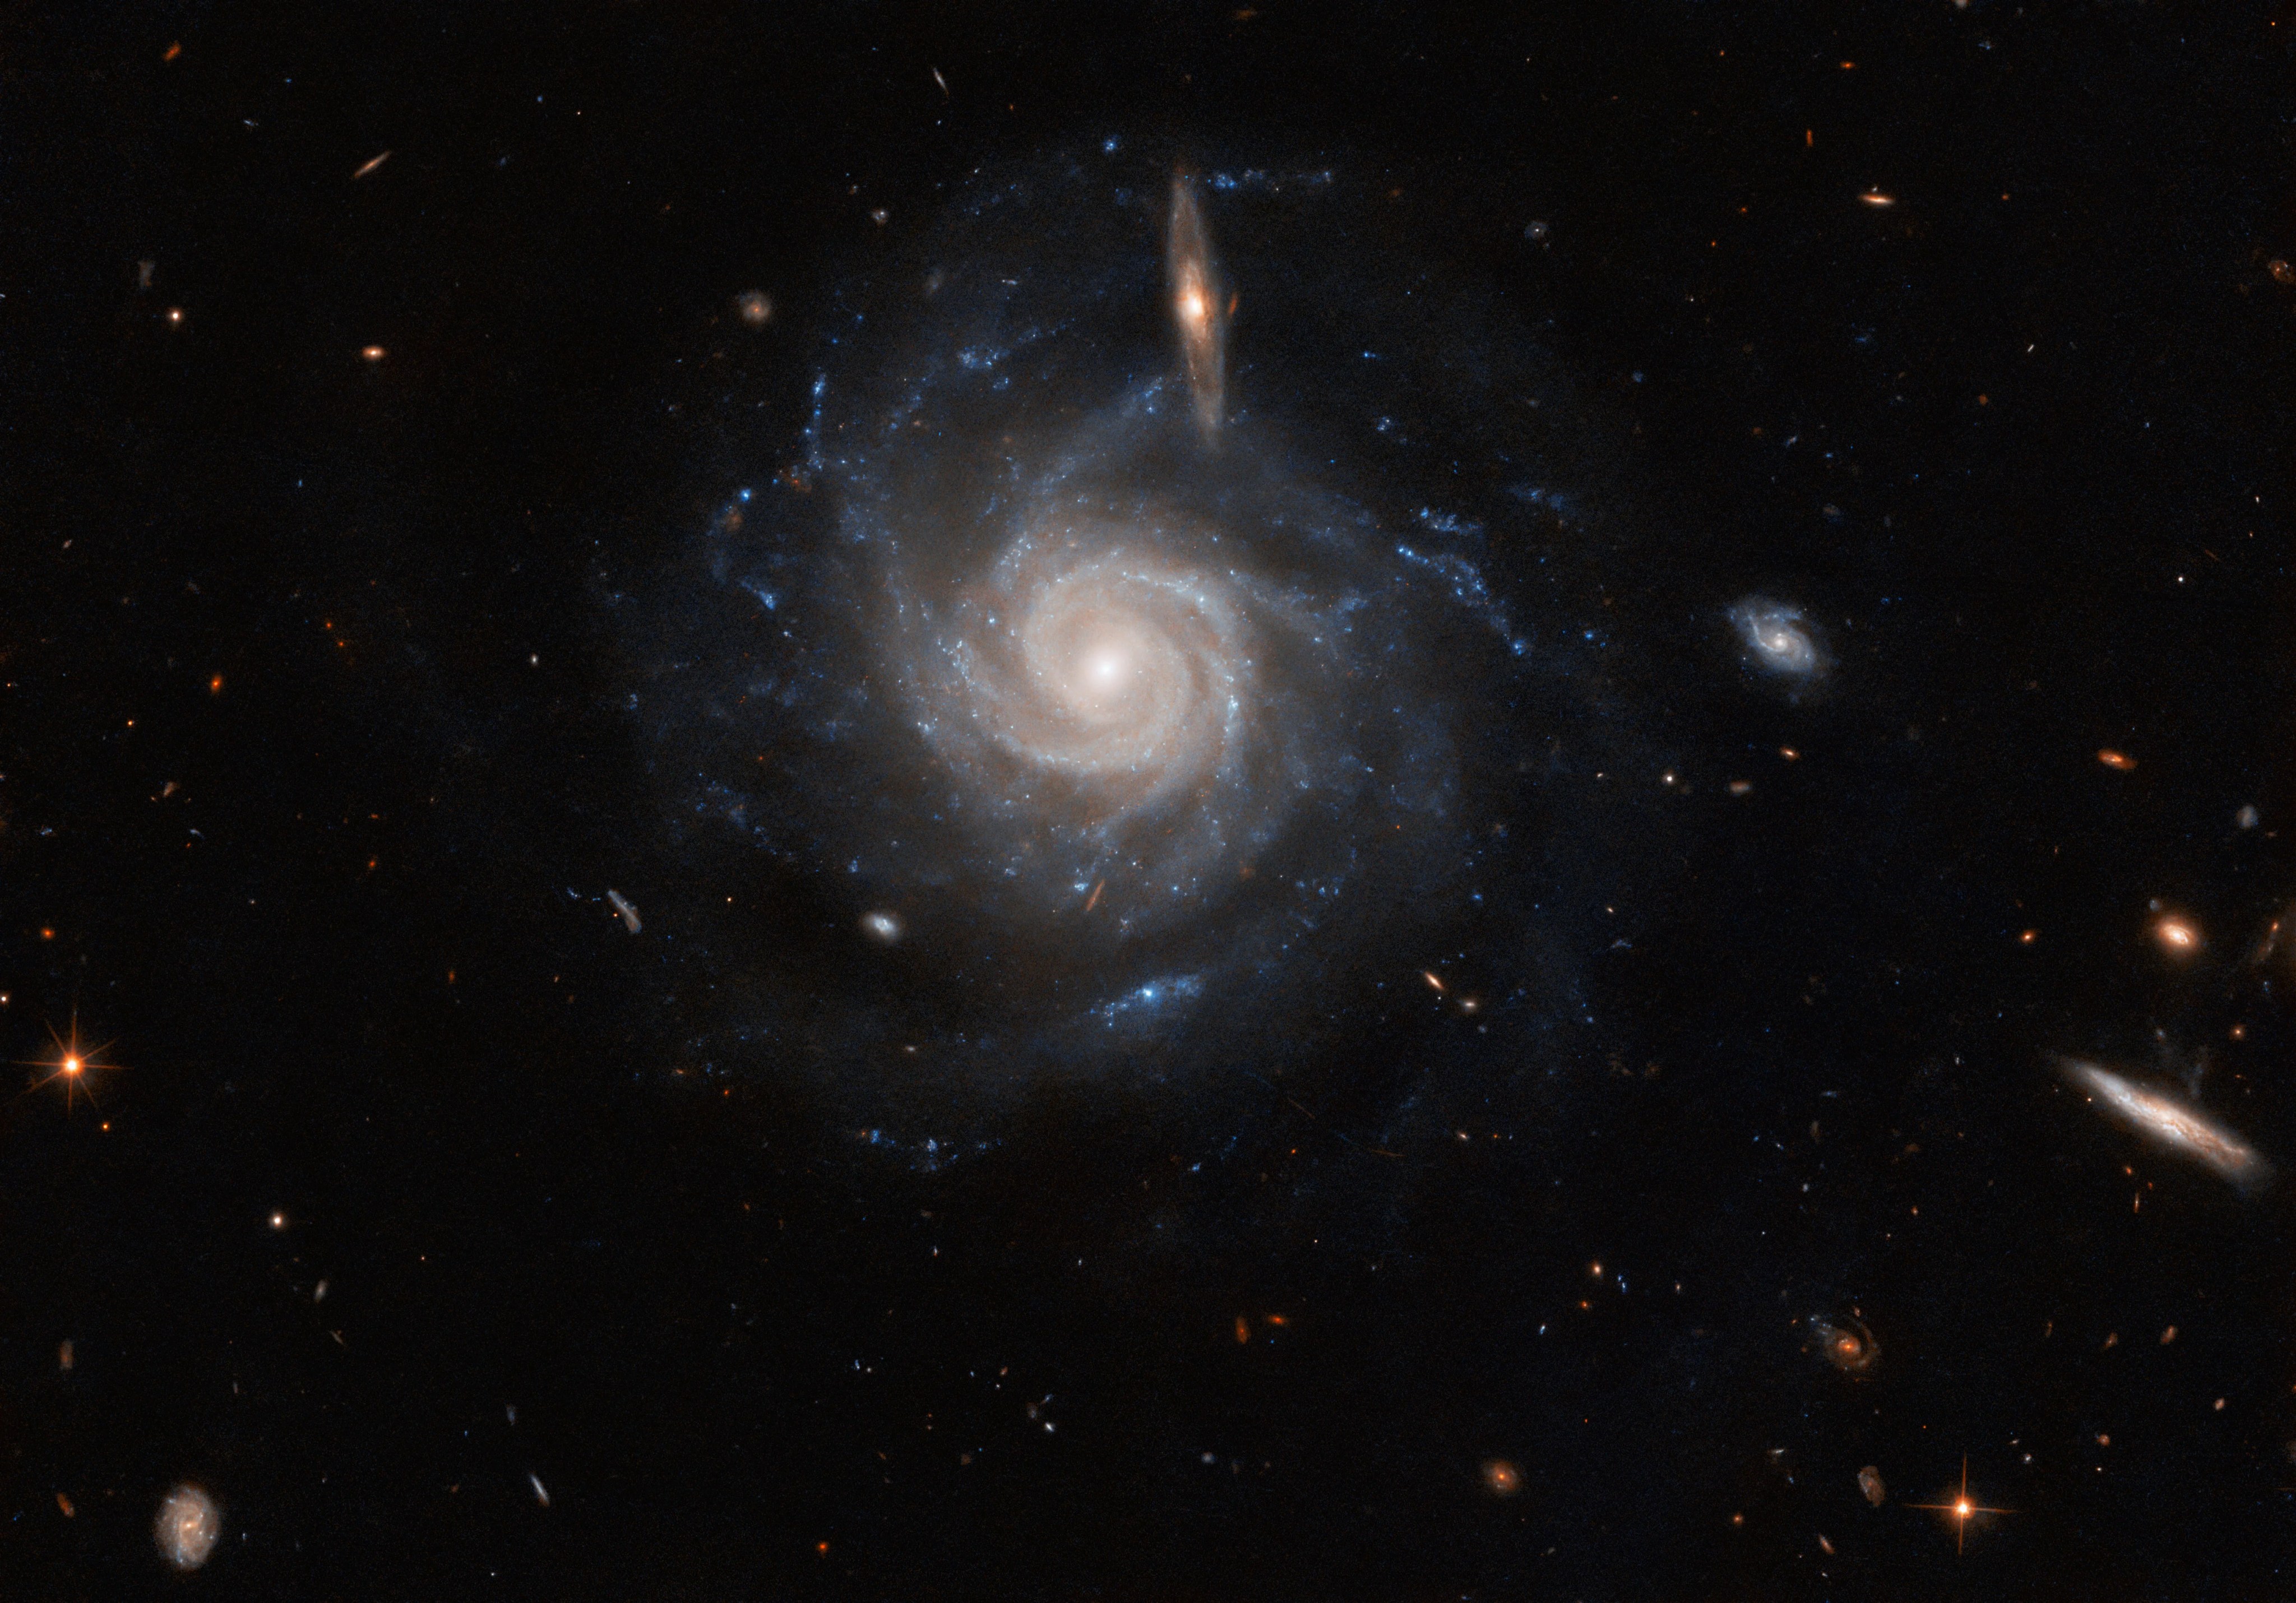 A large spiral galaxy. It has many narrow arms that are tightly-twisted in the center, but at the ends they point out in different directions. The galaxy’s core glows brightly, while its disc is mostly faint, but with bright blue spots throughout the arms. A few smaller spiral galaxies at varying angles are visible in front, and it is surrounded by other tiny stars and galaxies, on a black background.